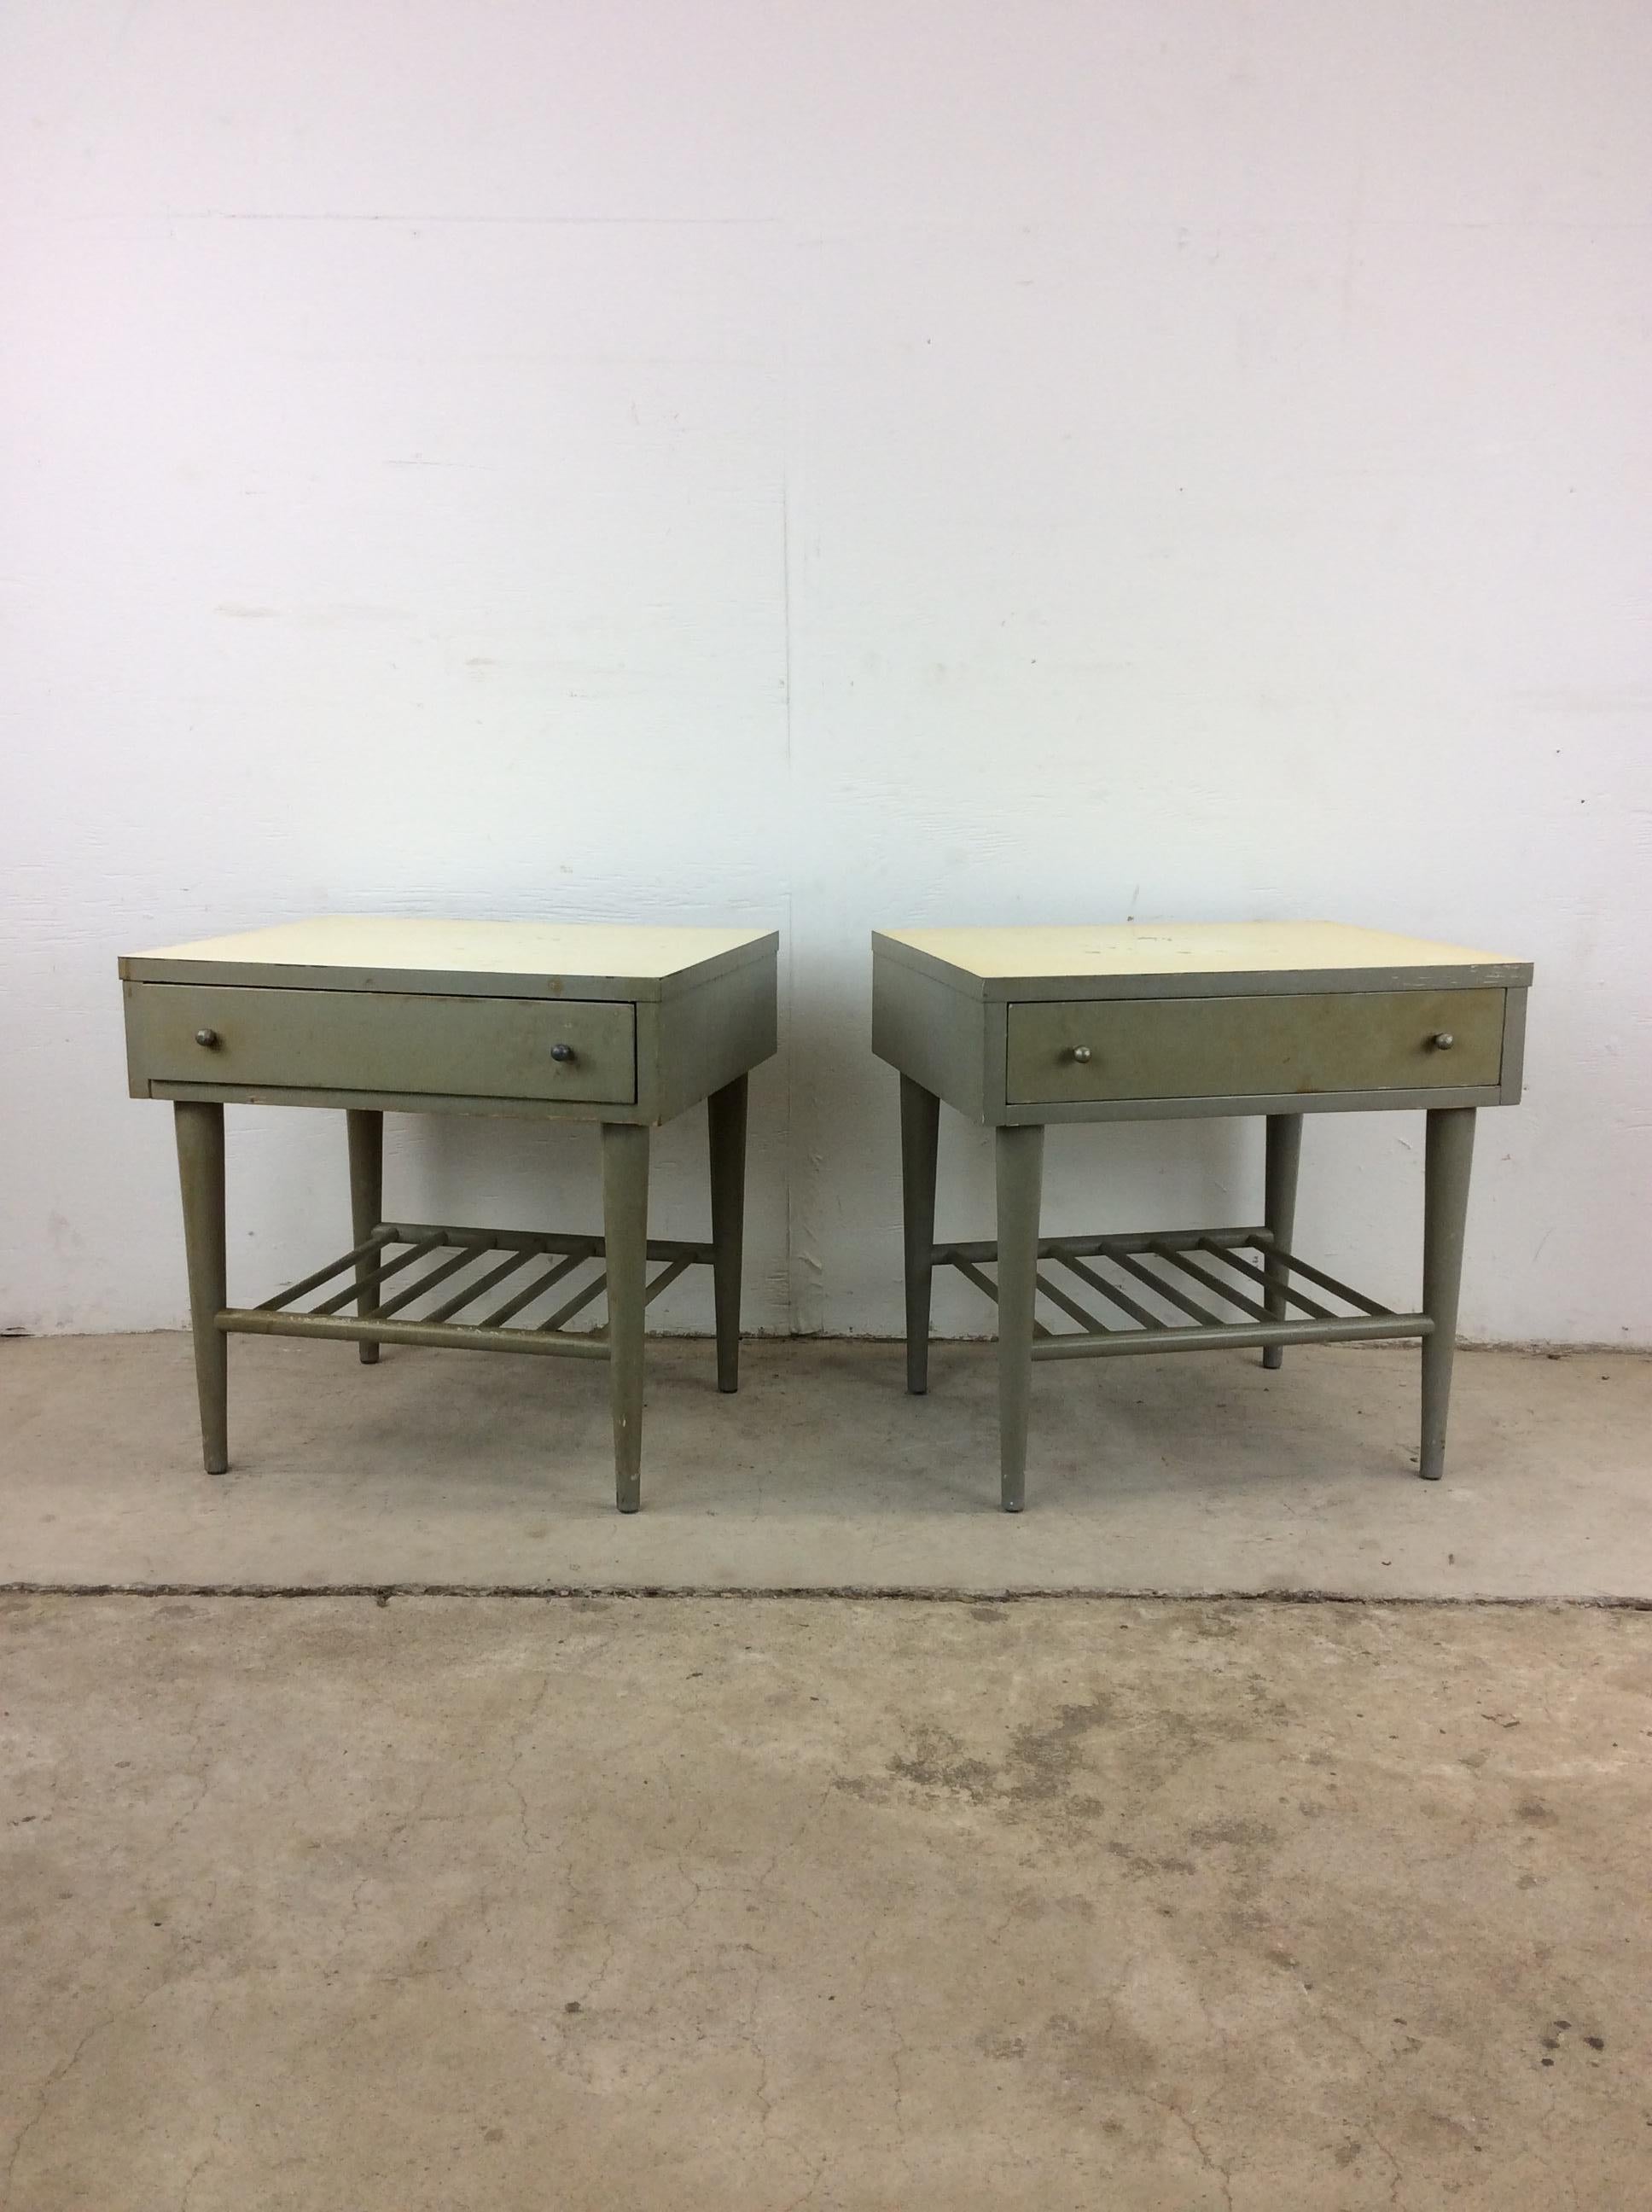 This pair of mid century modern nightstands by American of Martinsville feature hardwood construction, gray painted finish, dovetailed drawer with brass accented hardware, slat open shelving below, white lacquer top, and tall tapered legs.